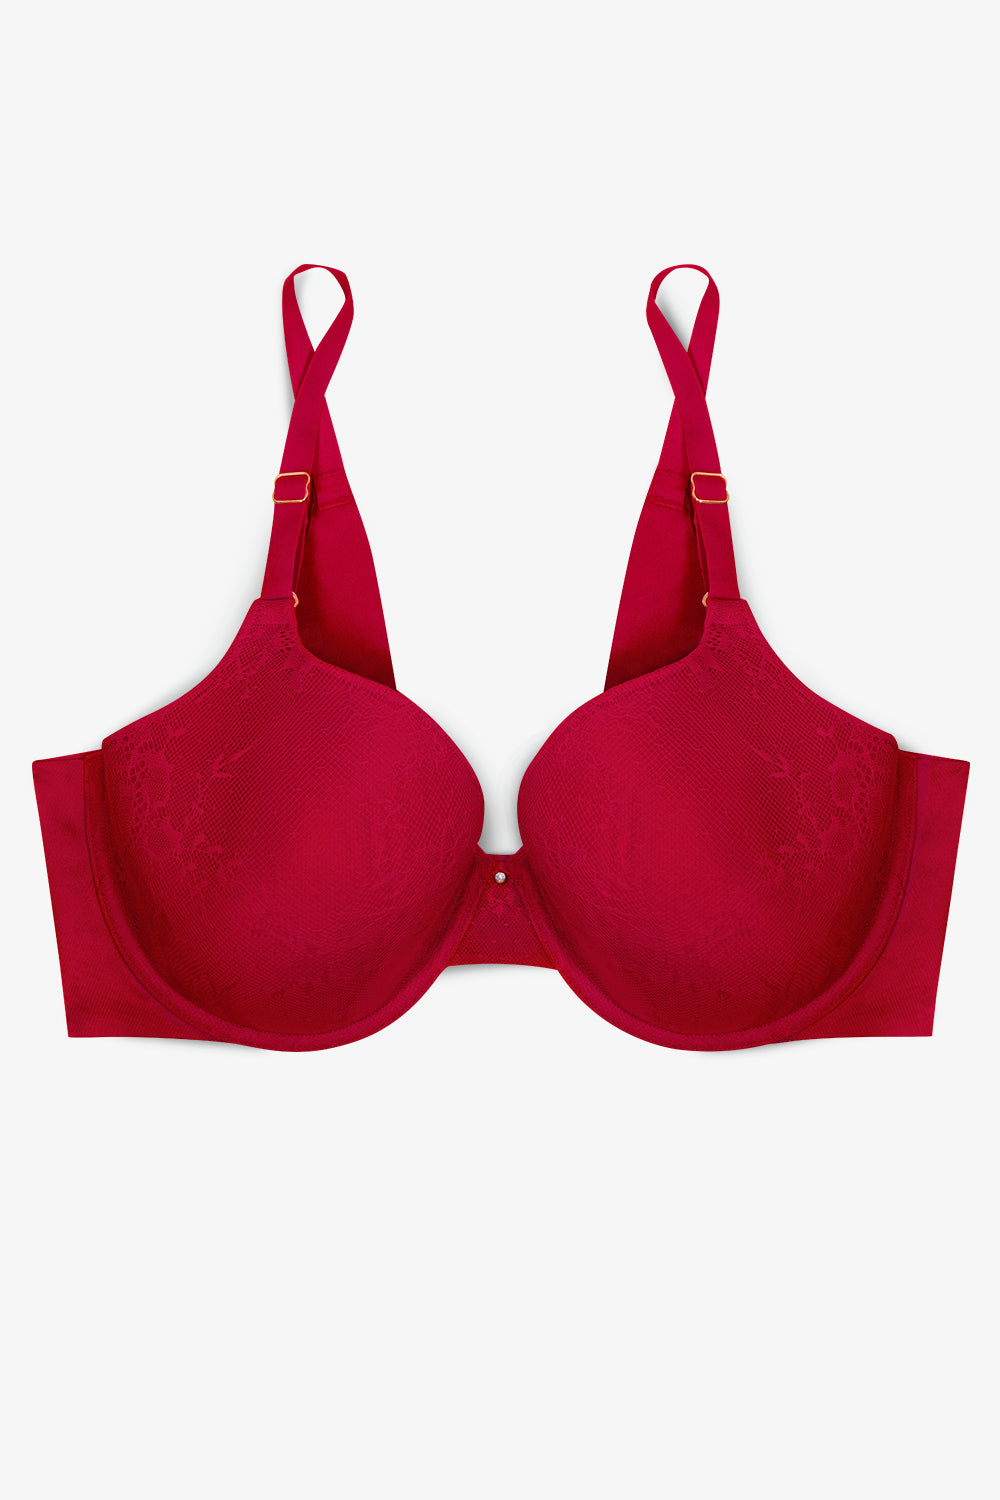 Breakout Bras - Did you know that smooth, seamless, t-shirt bras